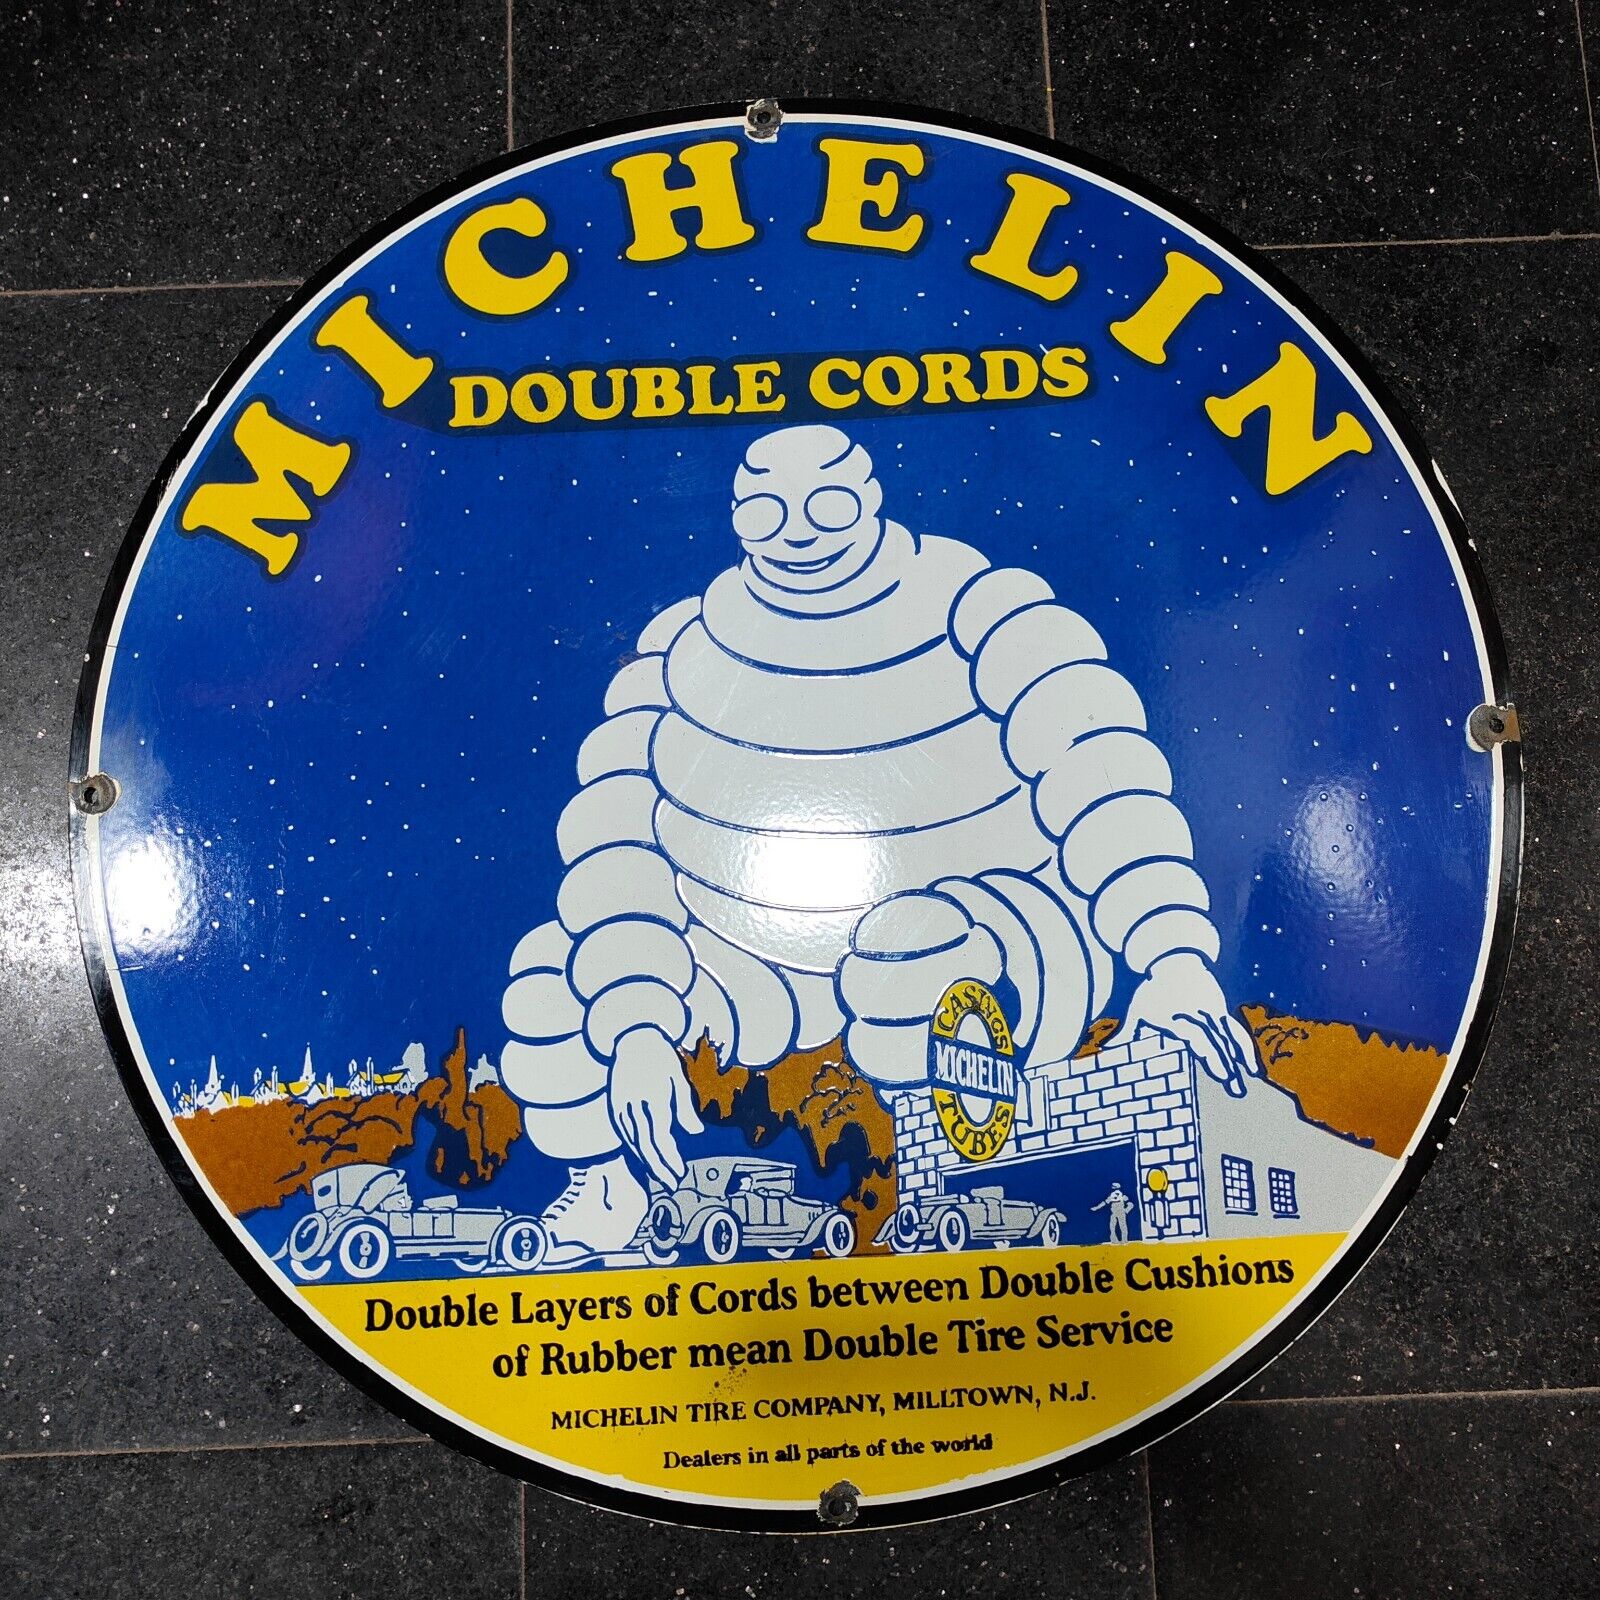 MICHELIN DOUBLE CARDS PORCELAIN ENAMEL SIGN 30 INCHES ROUND